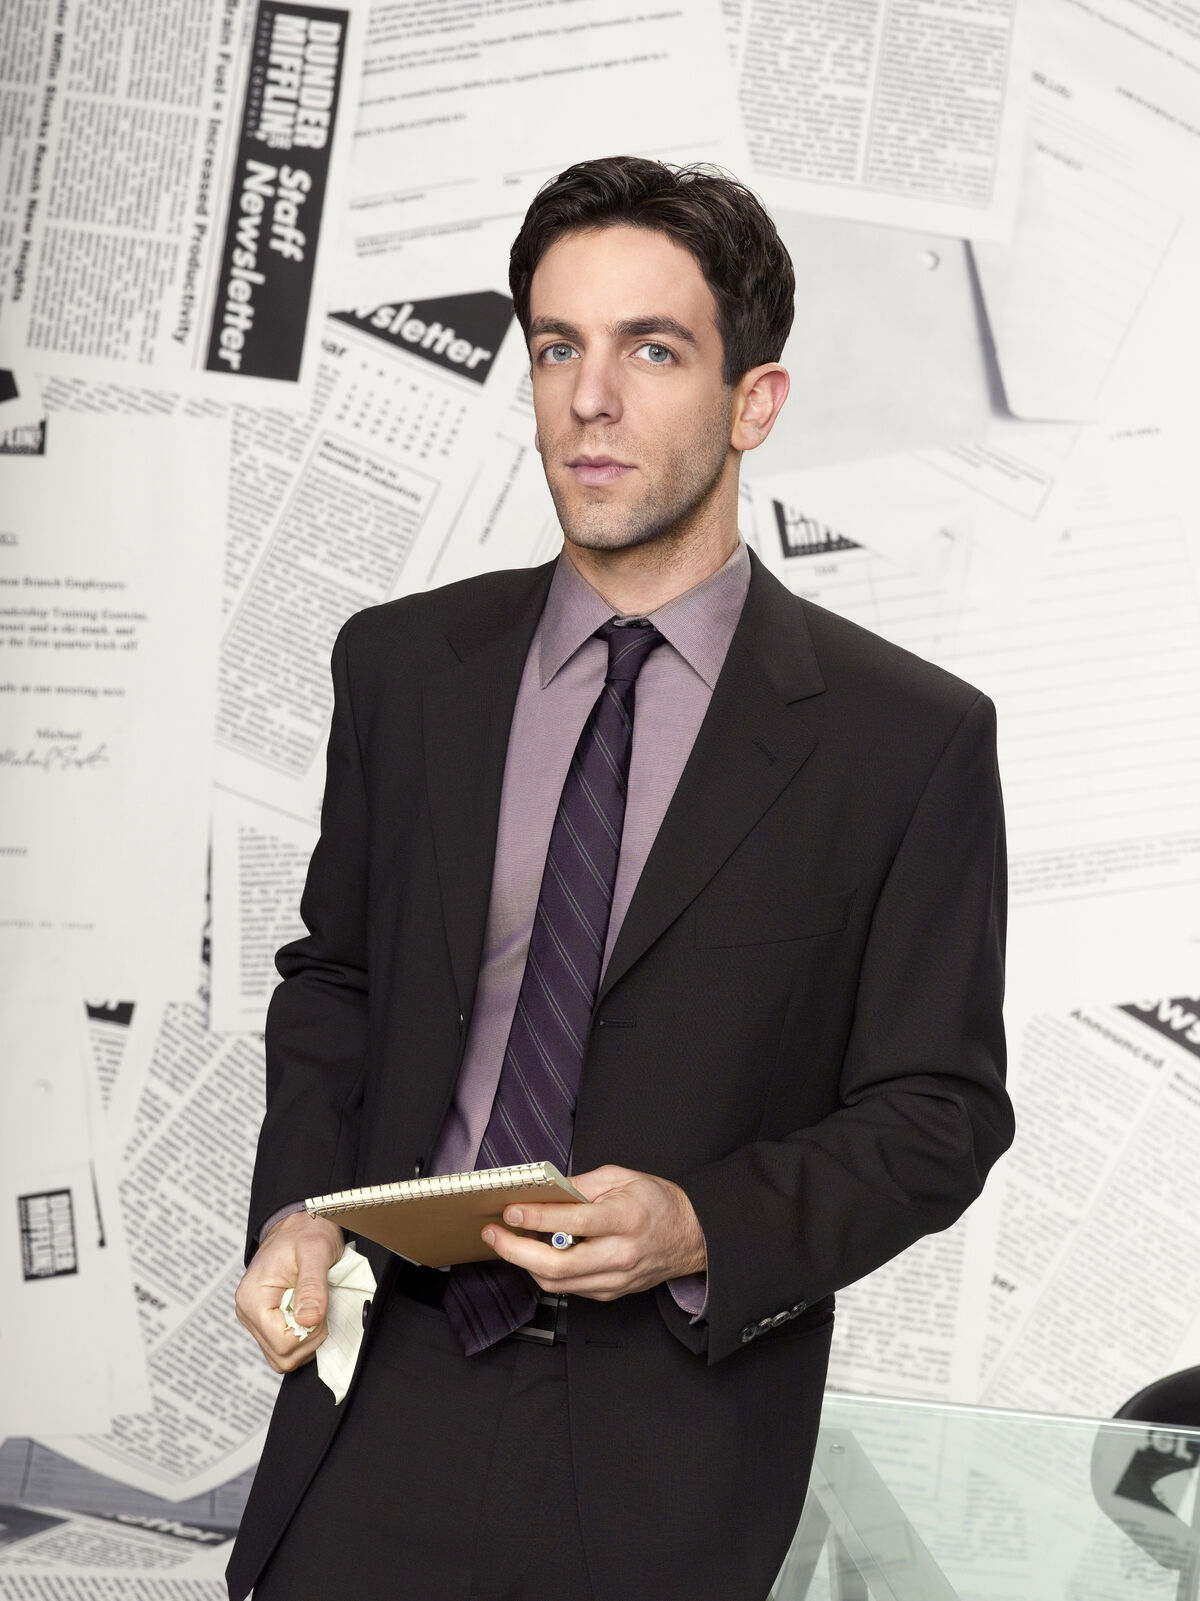 15 Signs You're Ryan Howard From The Office